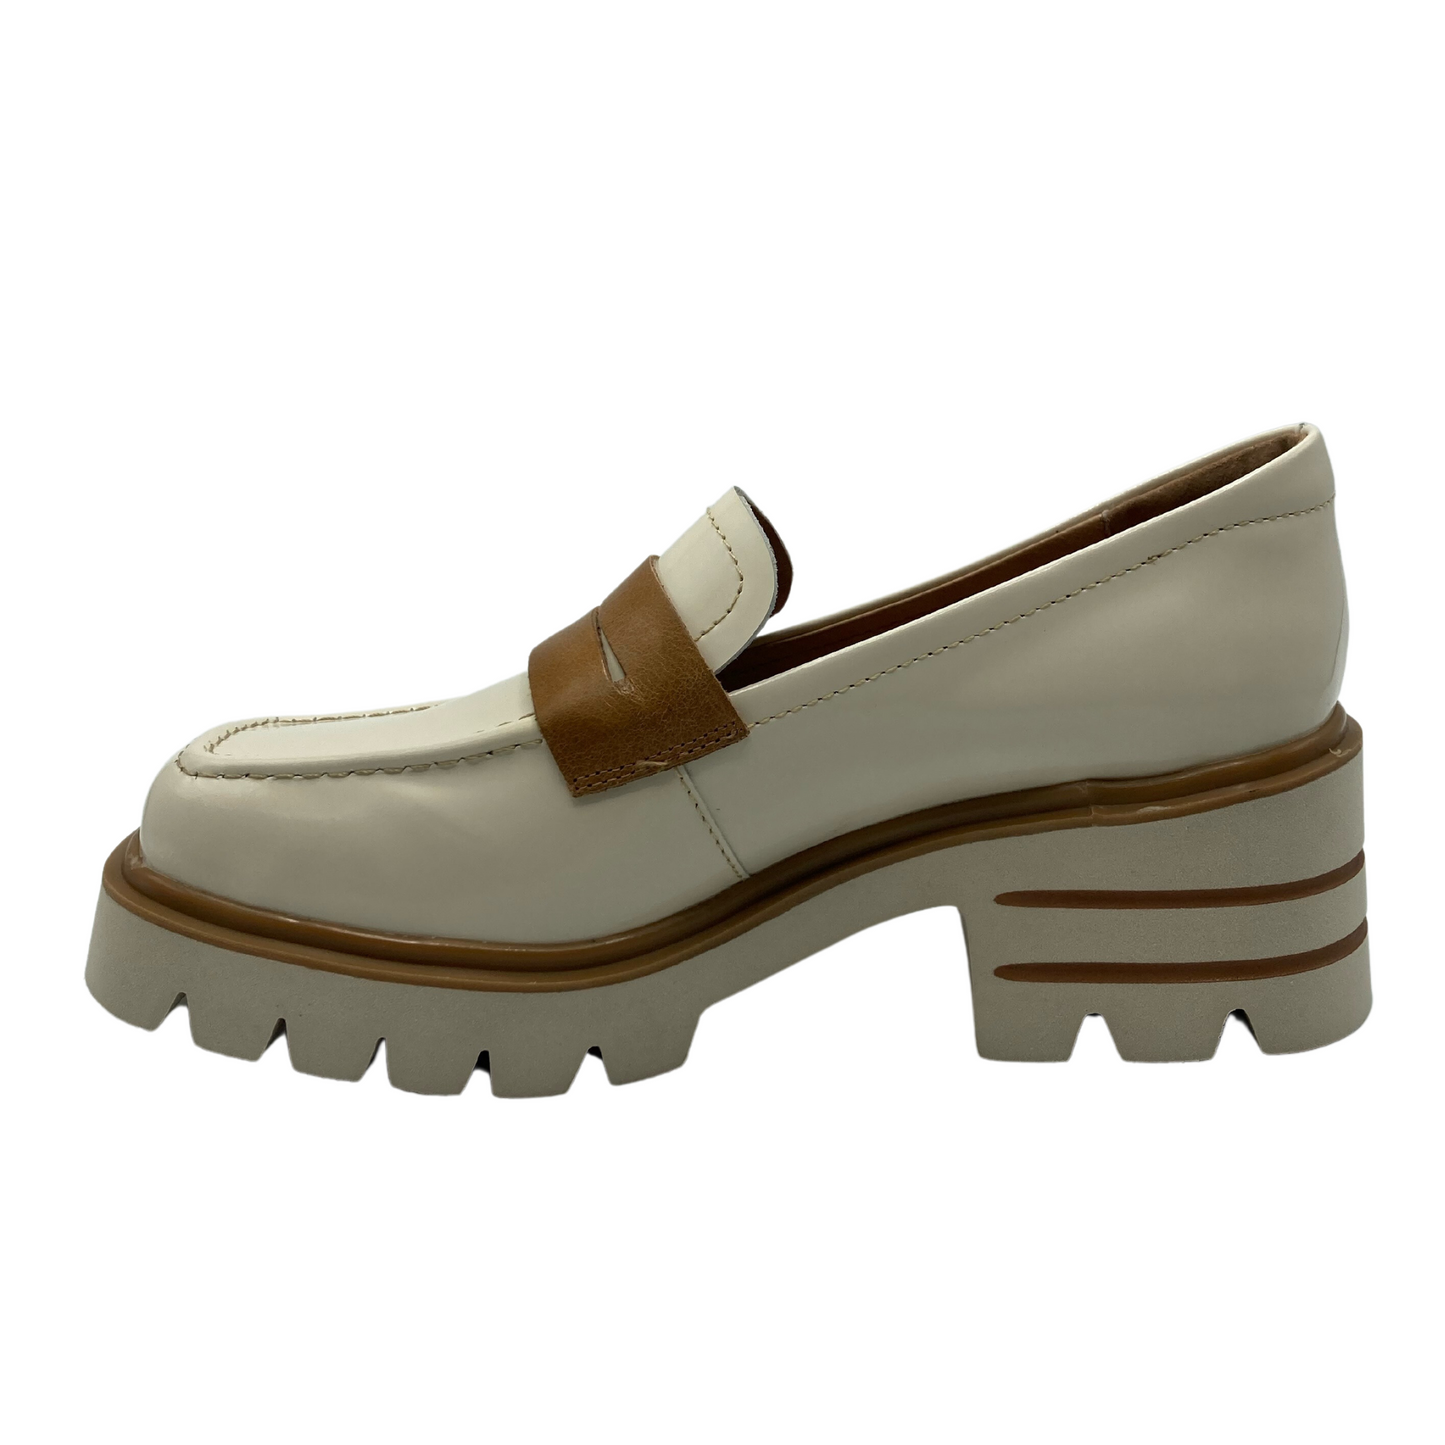 Left facing profile view of leather loafer with chunky heel and platform toe